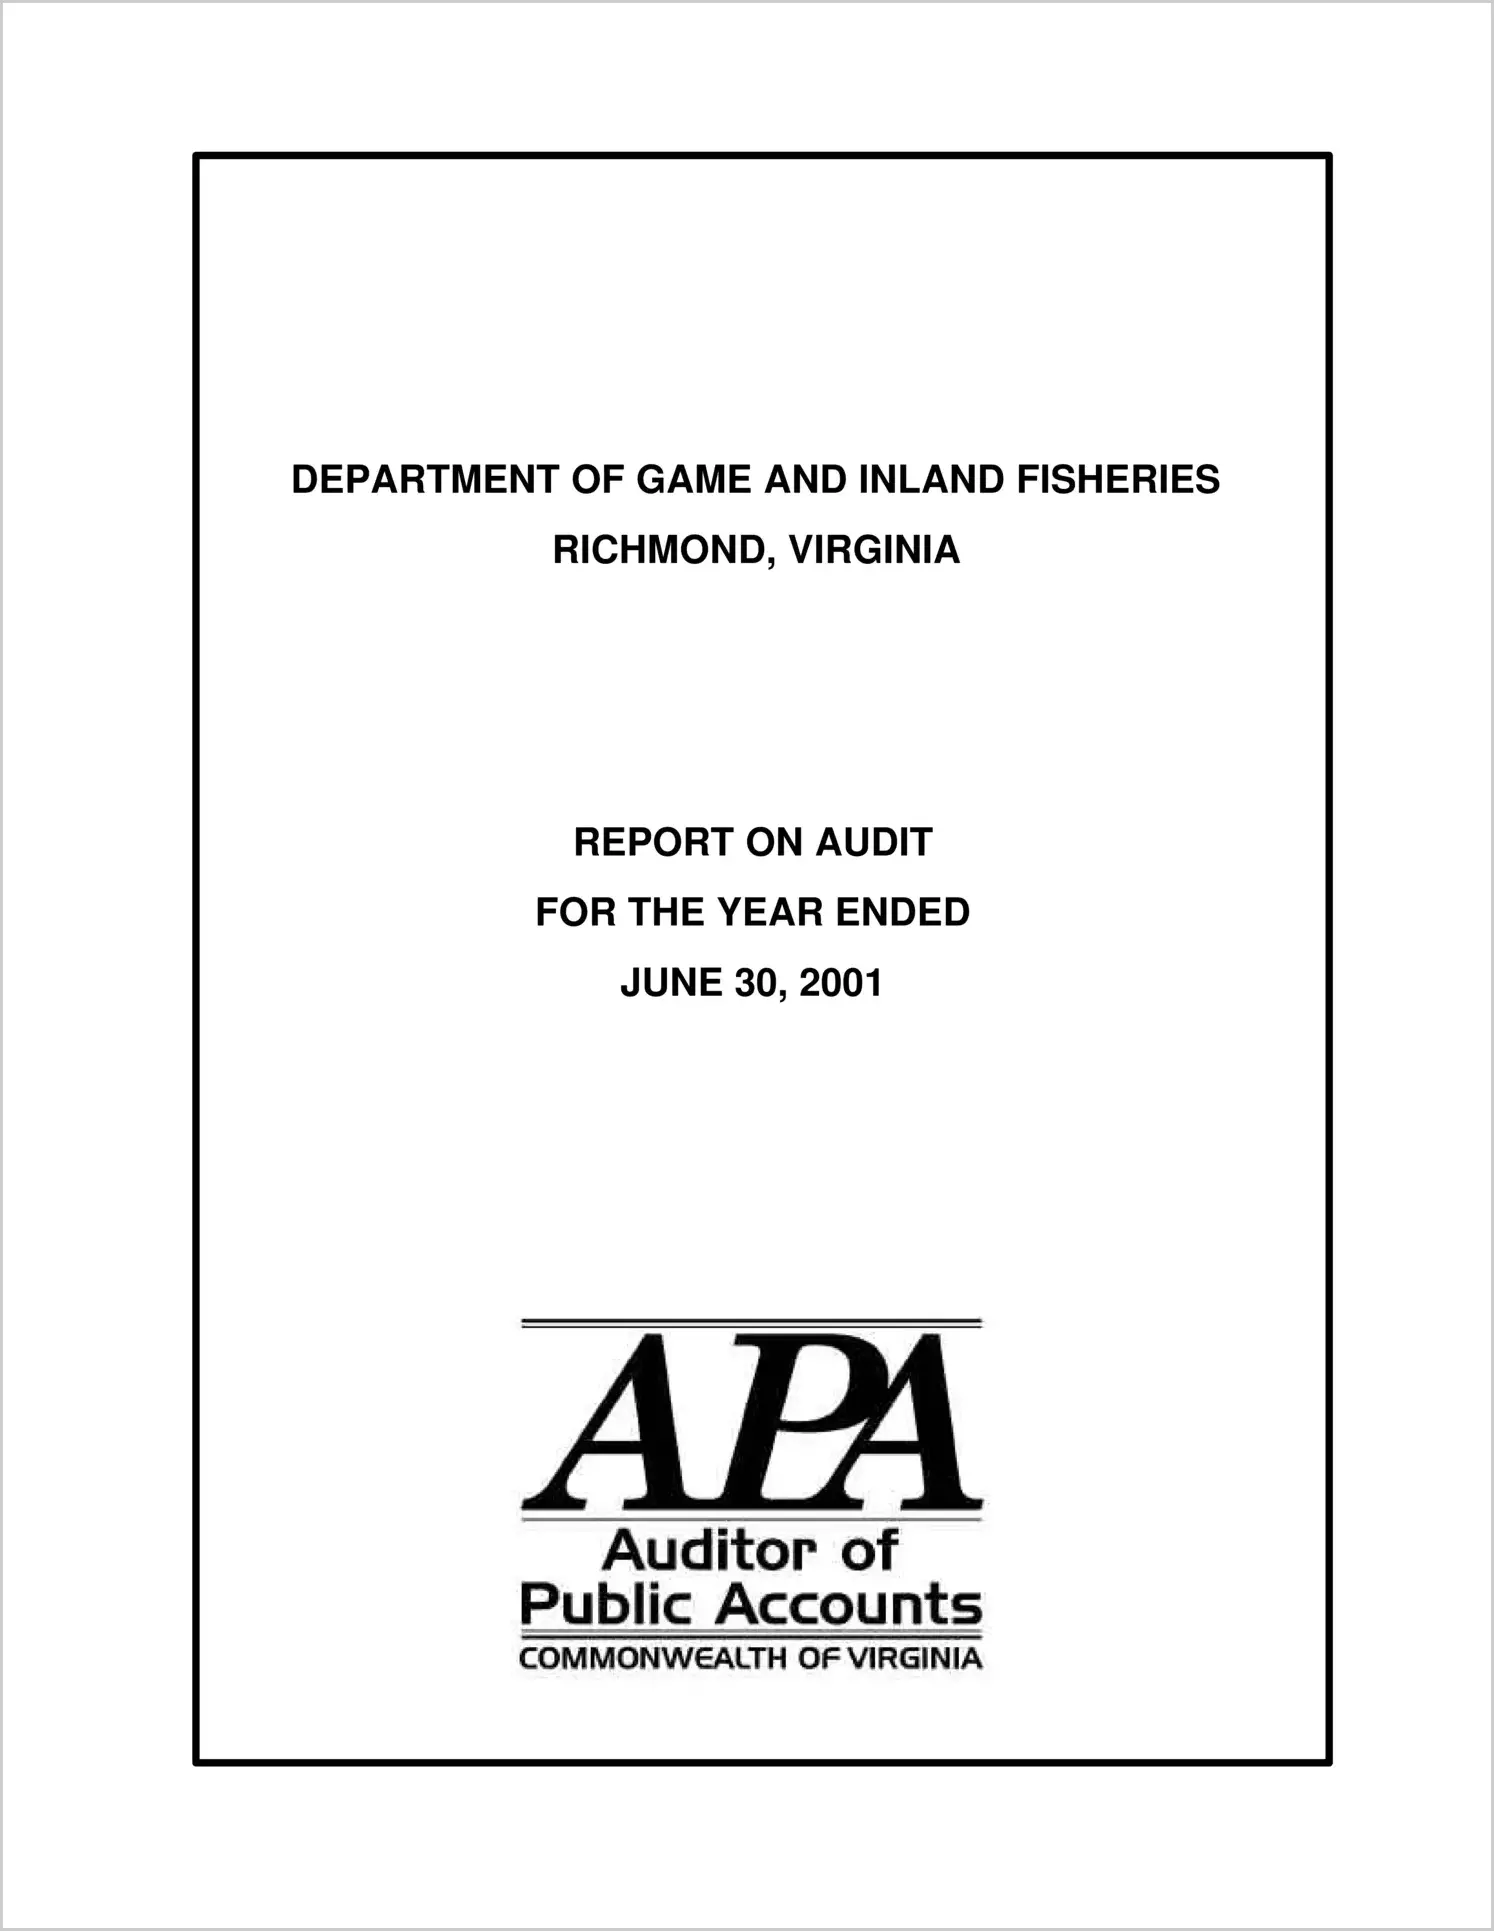 Department of Game and Inland Fisheries for the two-year period ended June 30,2001